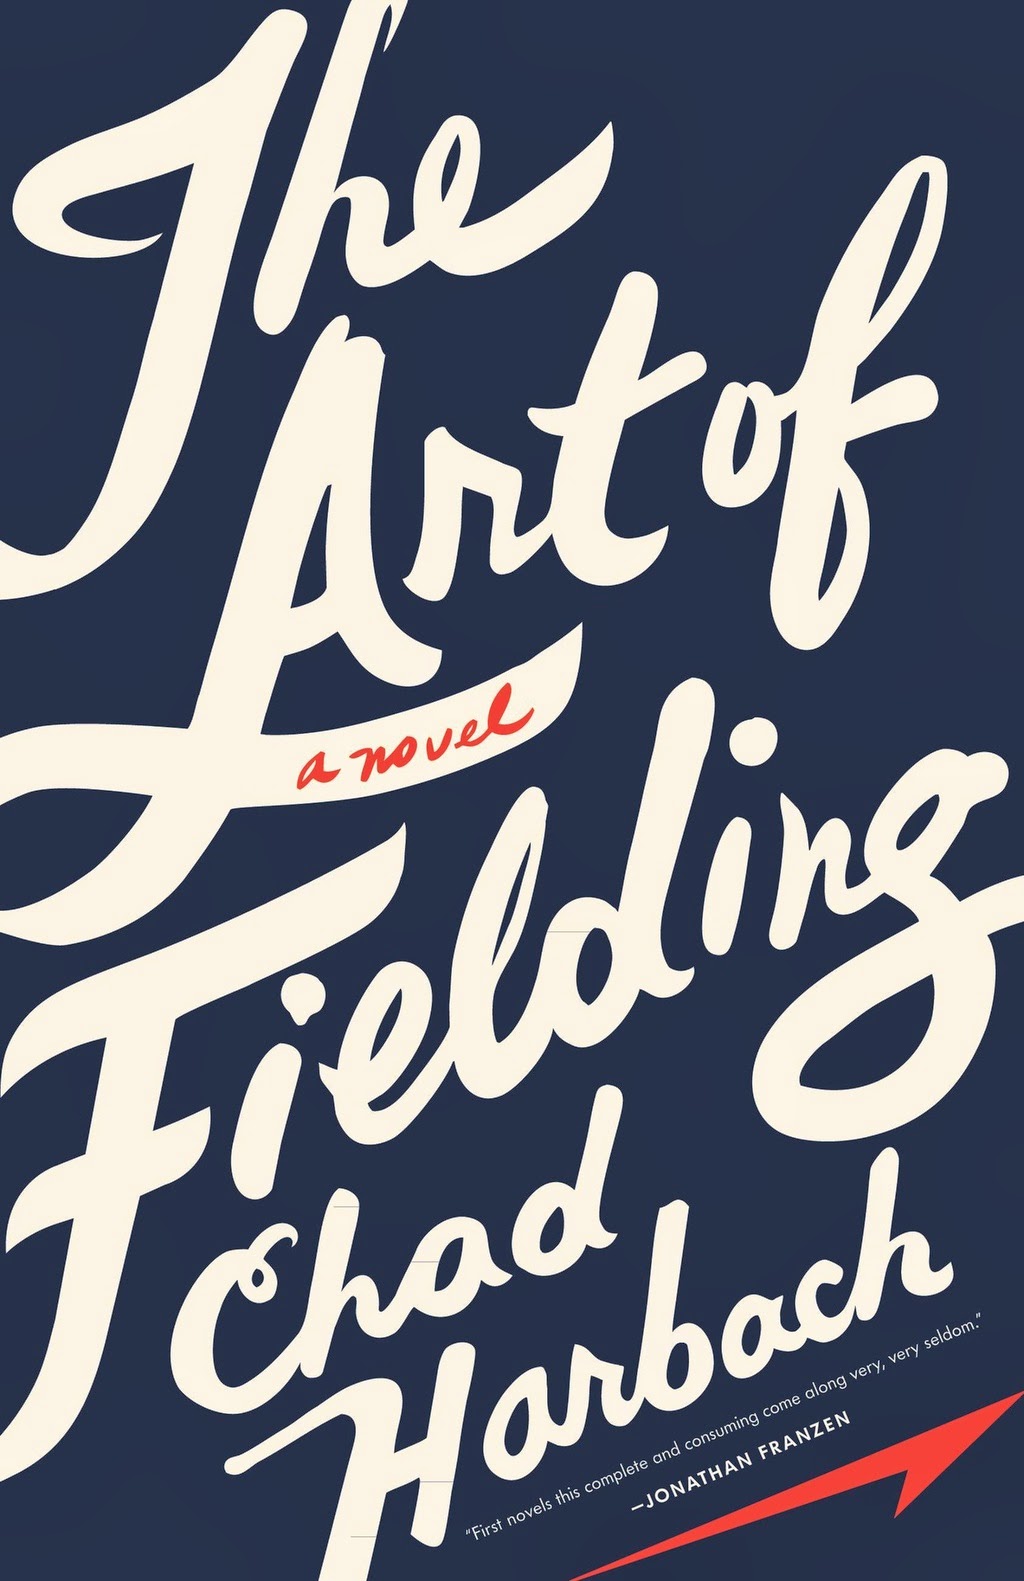 http://discover.halifaxpubliclibraries.ca/?q=title:%22art%20of%20fielding%22